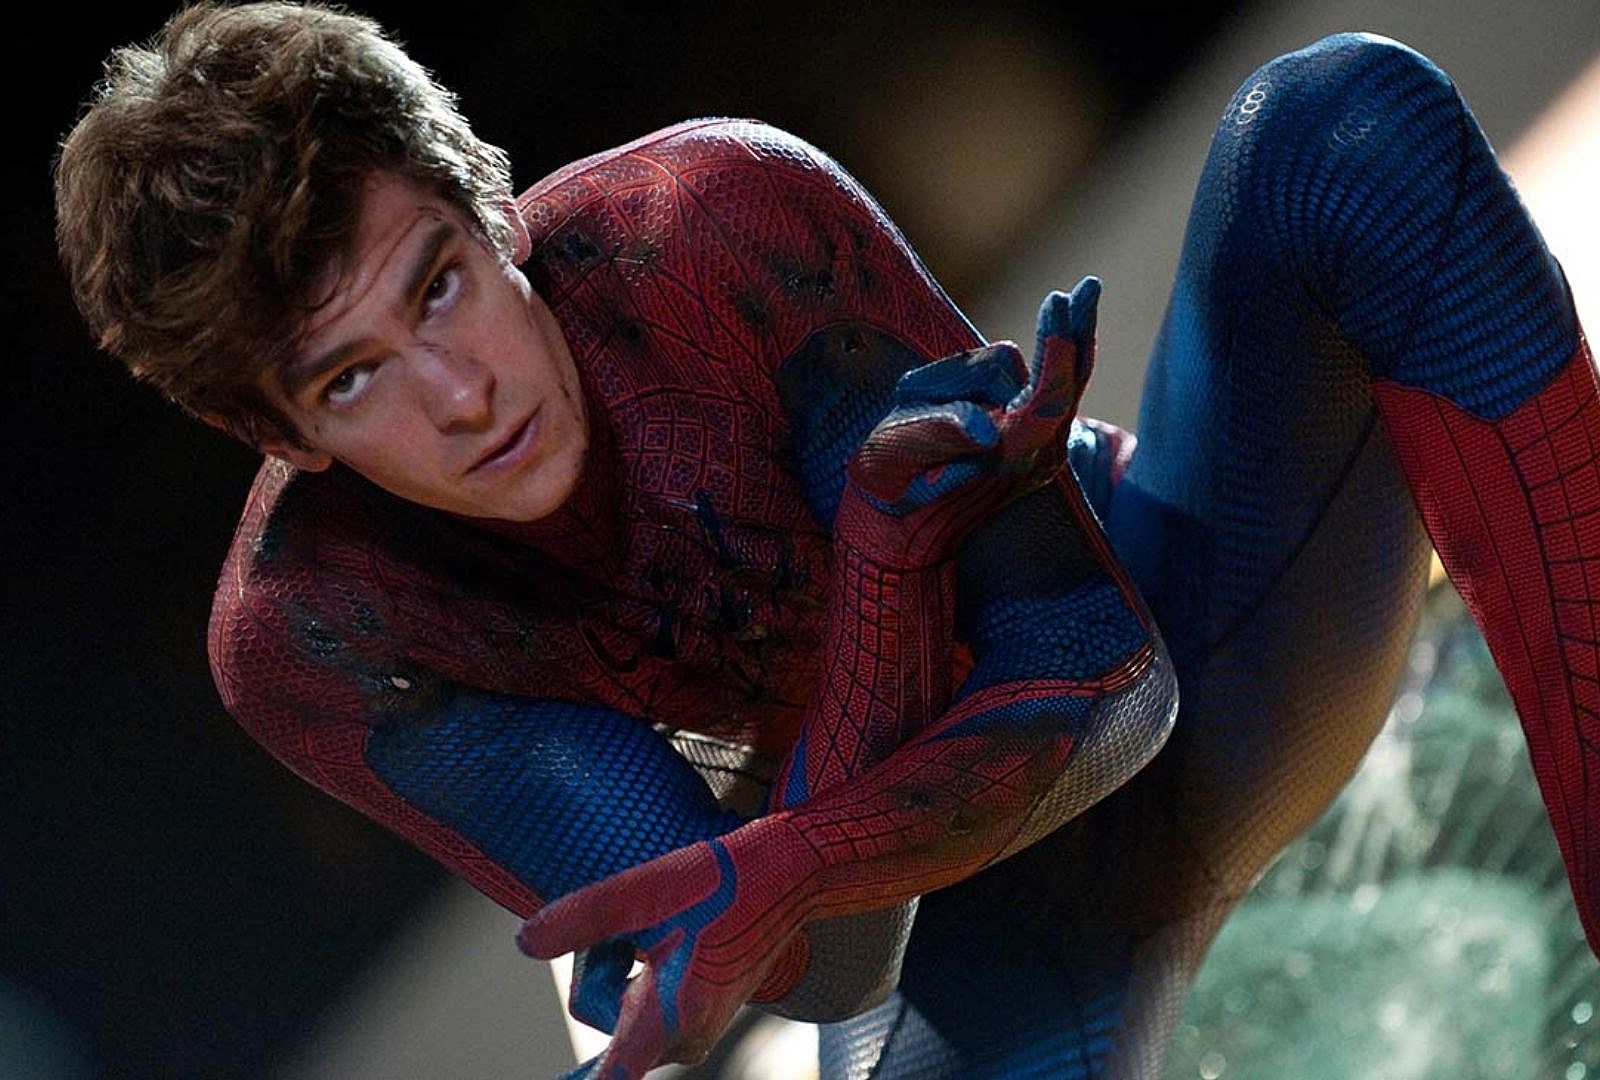 Andrew Garfield Says 'Spider-Man' Set Image Was Photoshopped